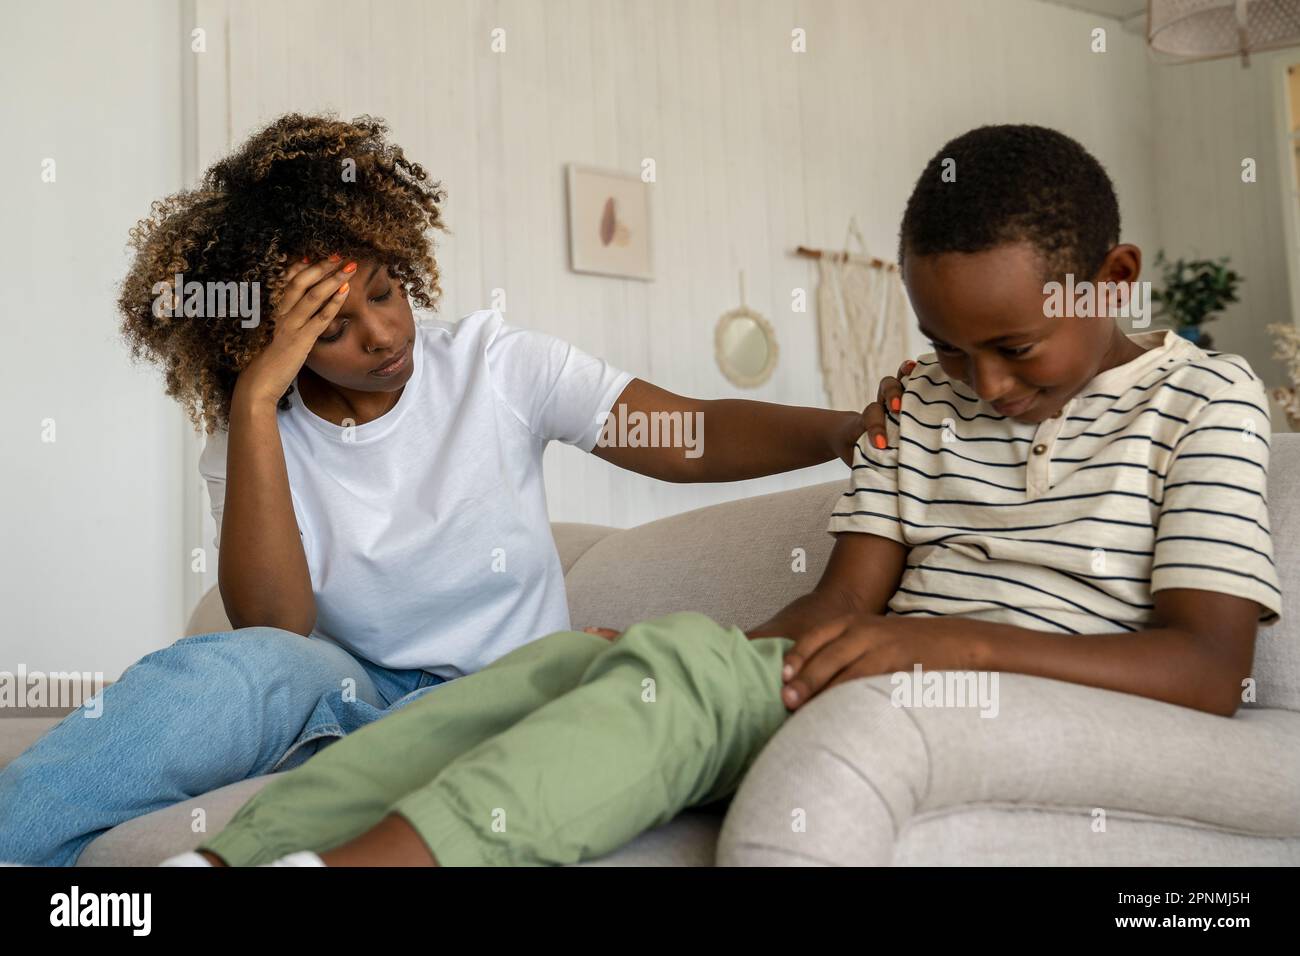 Naughty mischievous mixed race child boy smiles maliciously in response to tired mother moralising Stock Photo